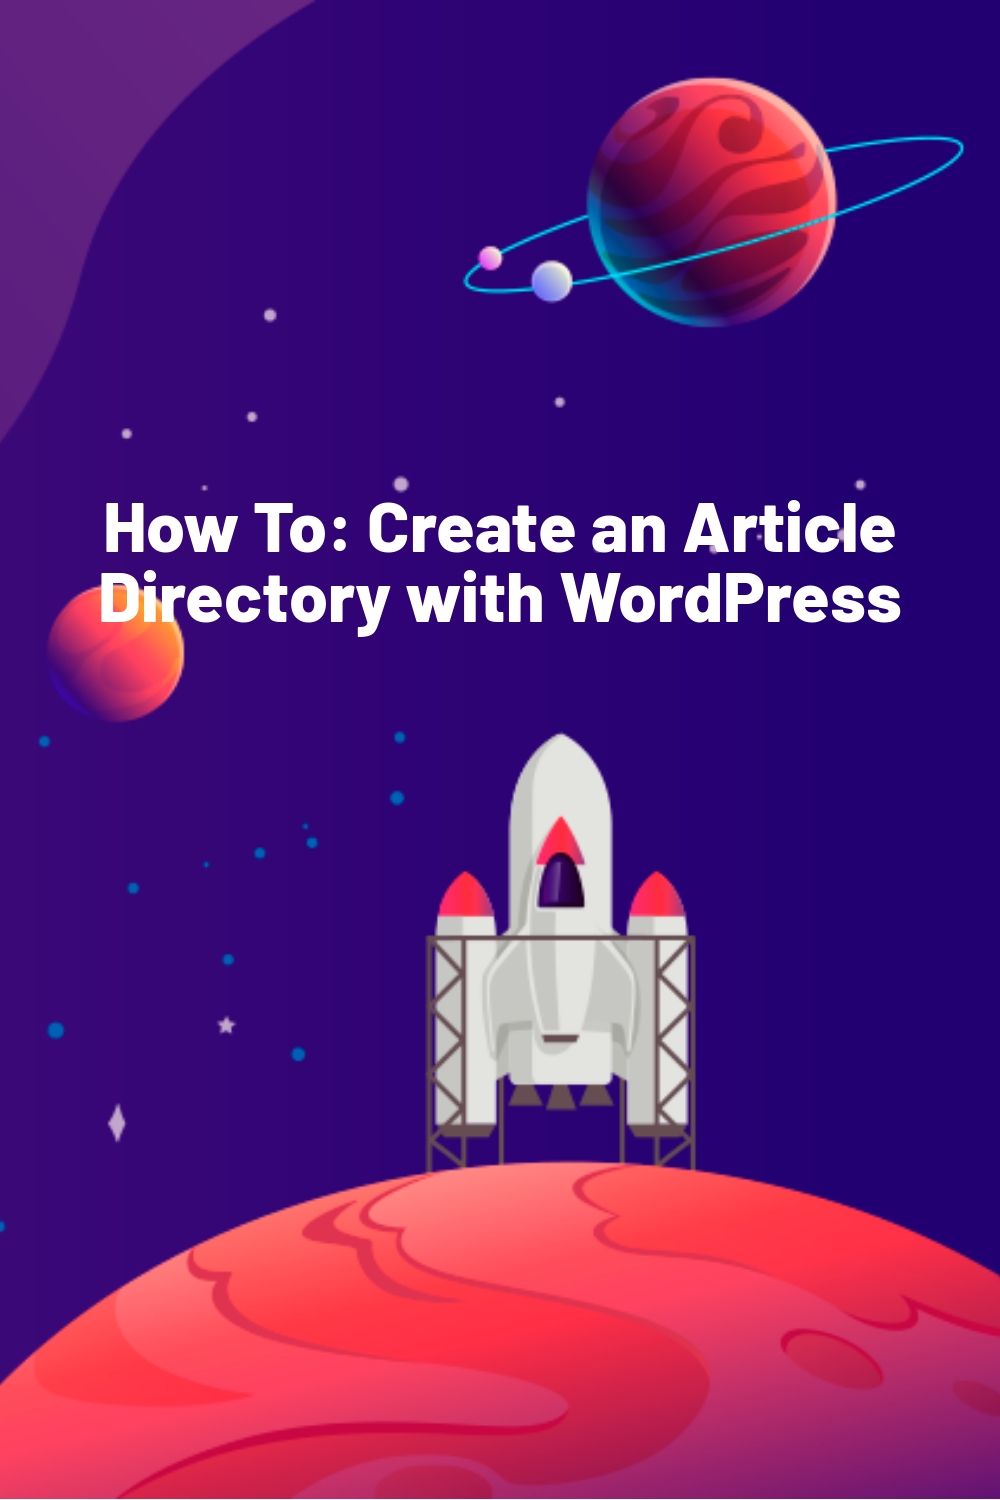 How To: Create an Article Directory with WordPress